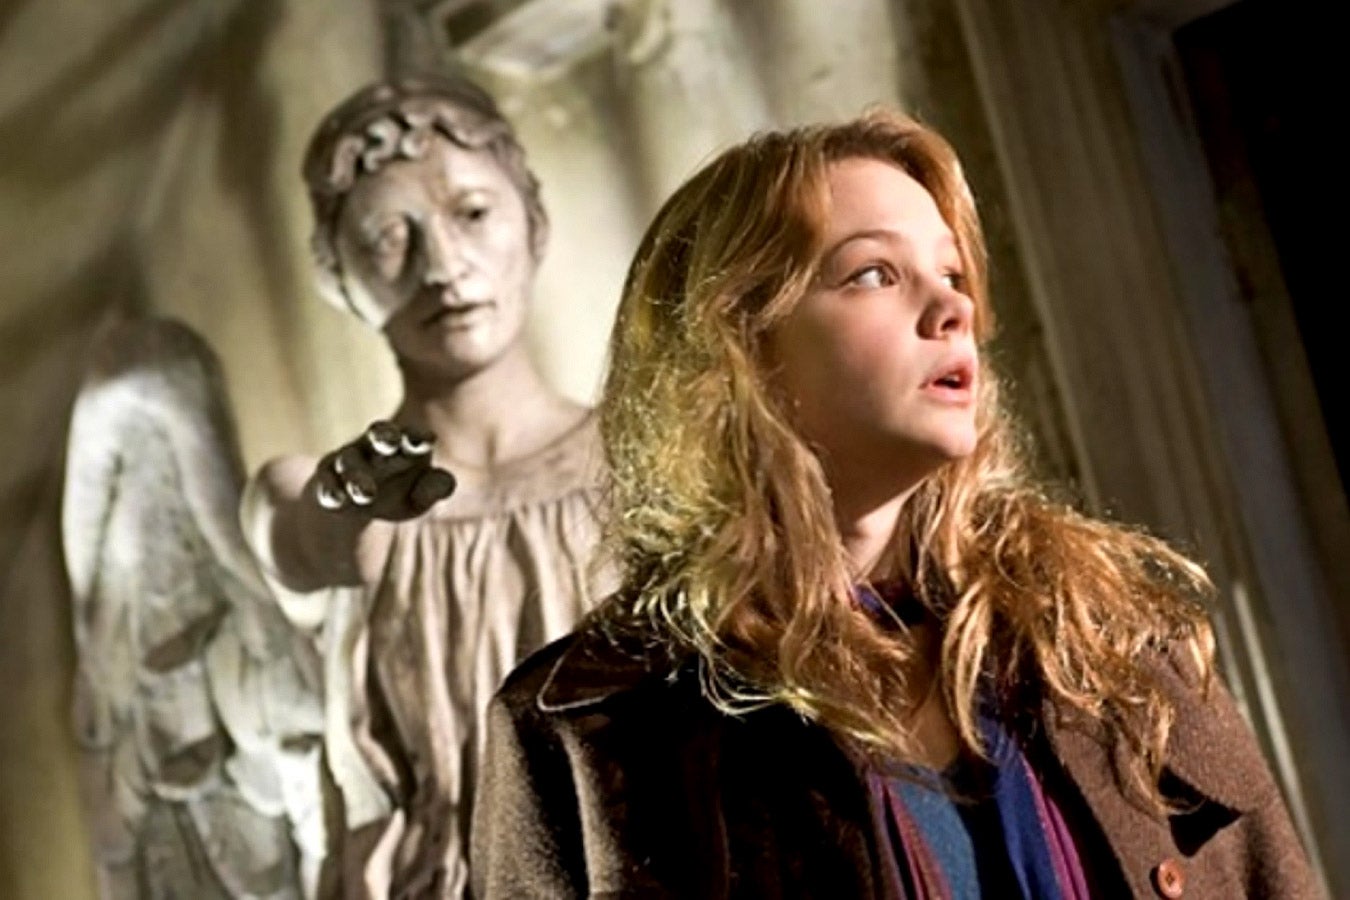 A blond woman looks off to the side, startled, while behind her, a statue reaches out to touch her.